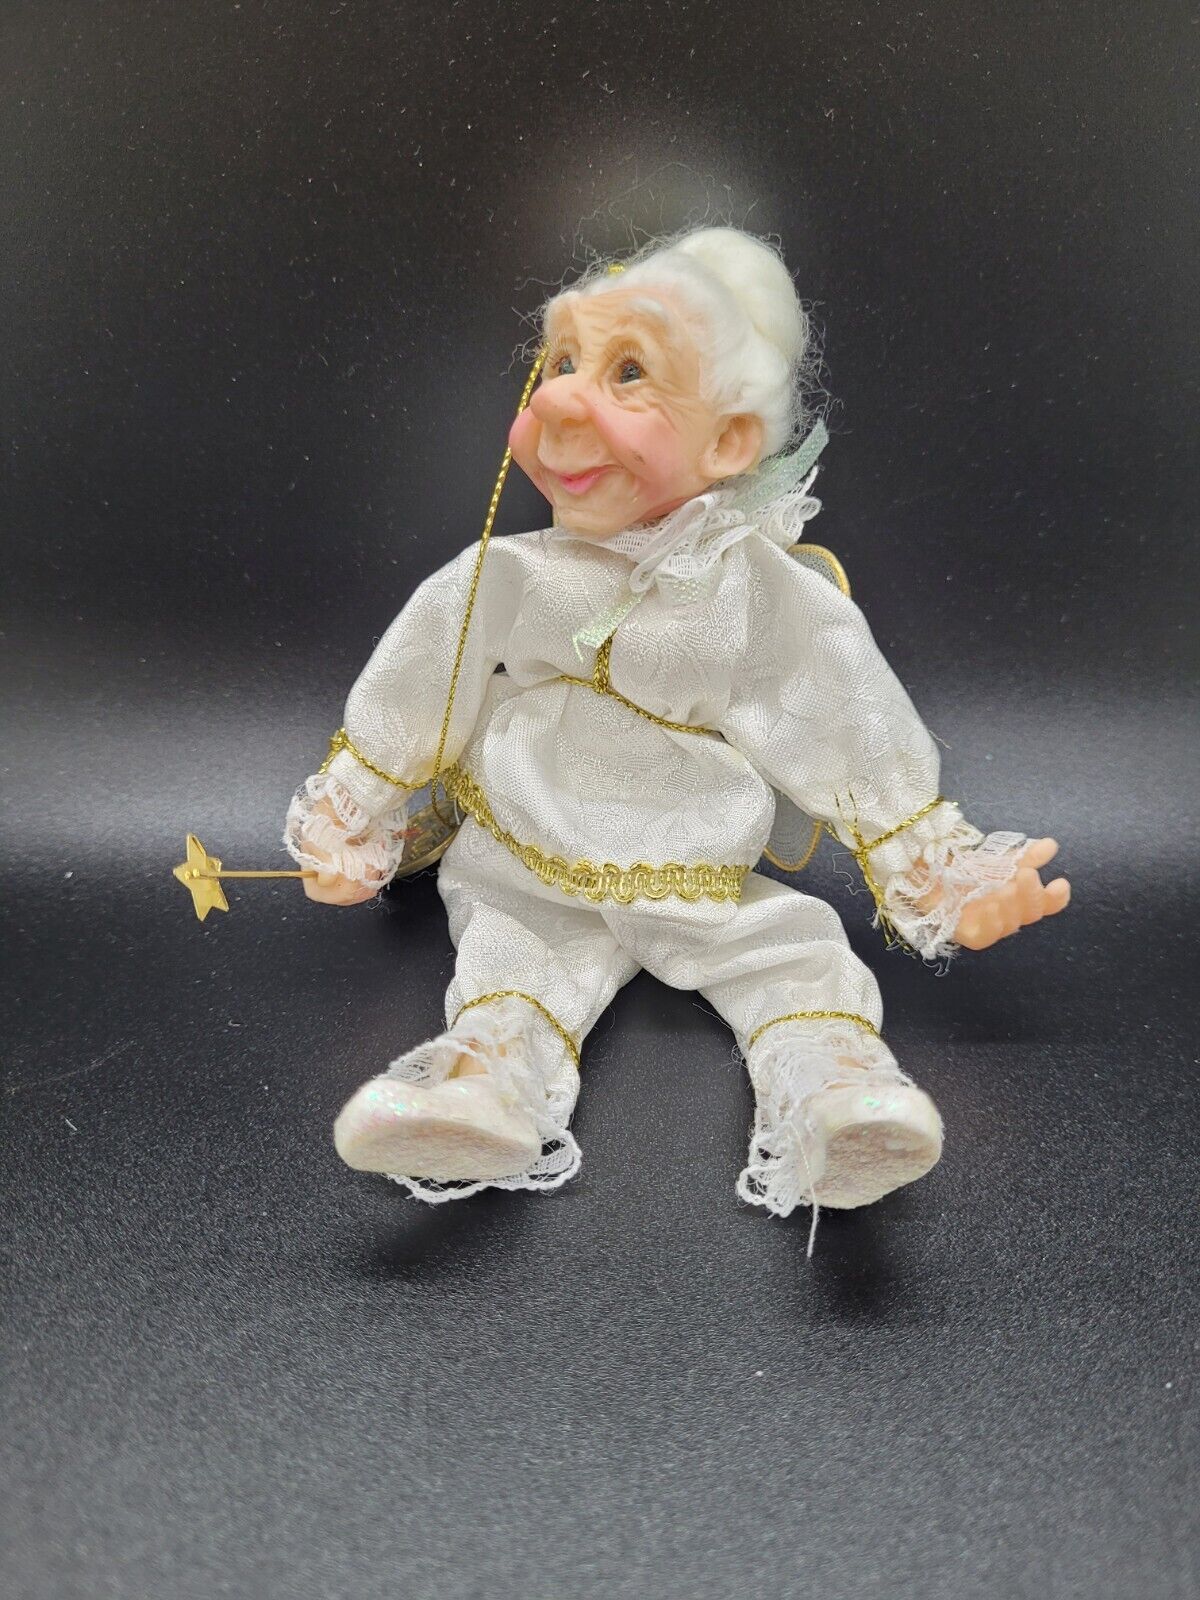 Jkc Fairy Godmother Ornament Doll 7